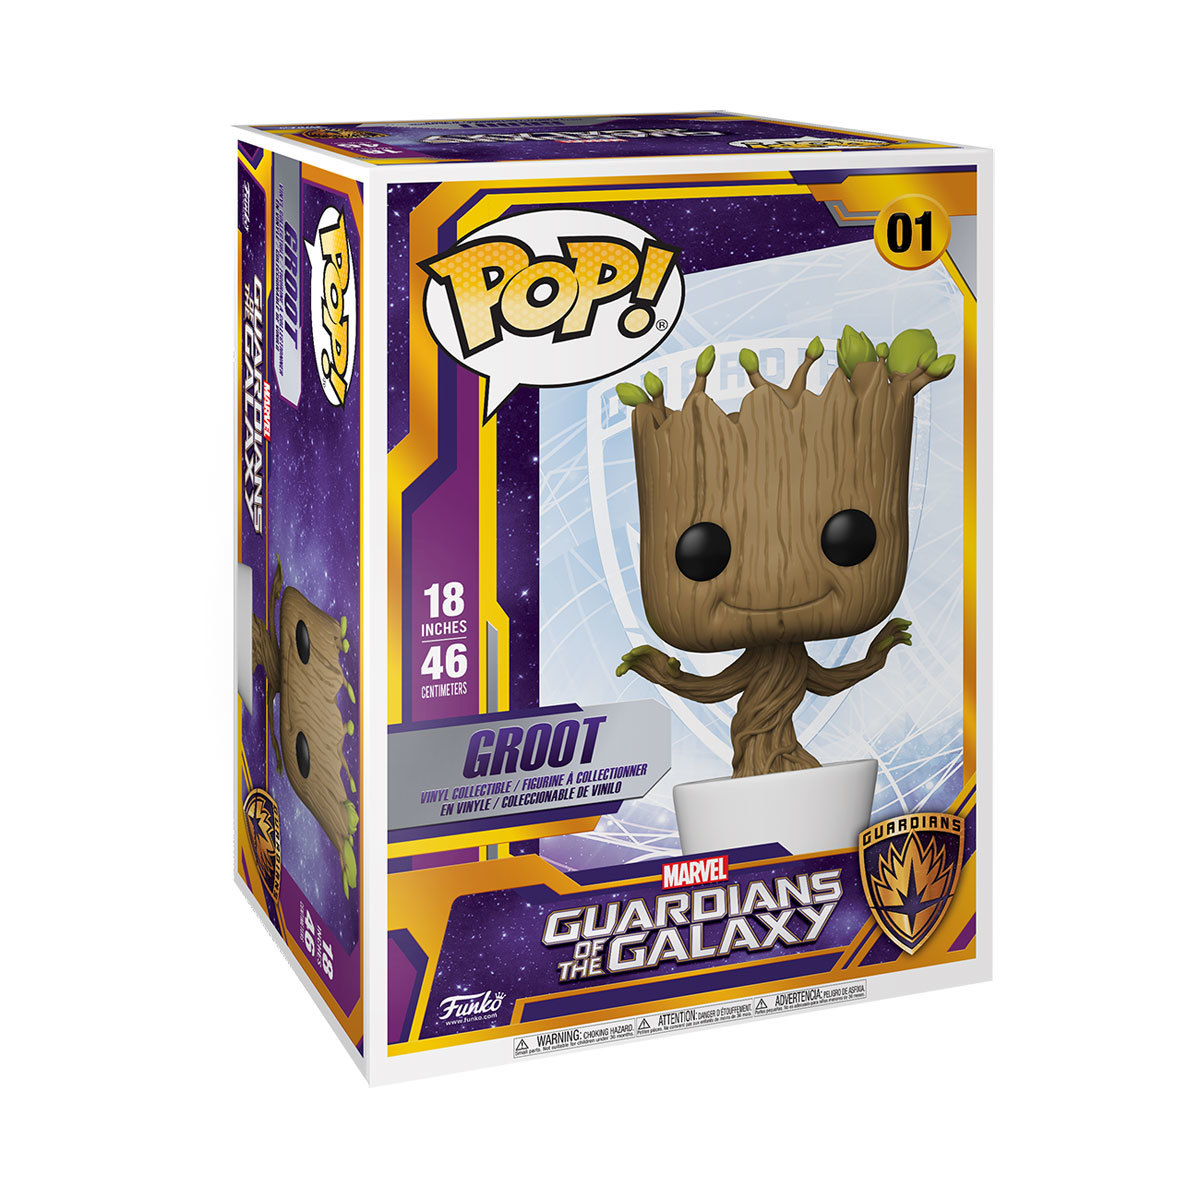  Funko Pop! Guardians Of The Galaxy - Super Sized Groot